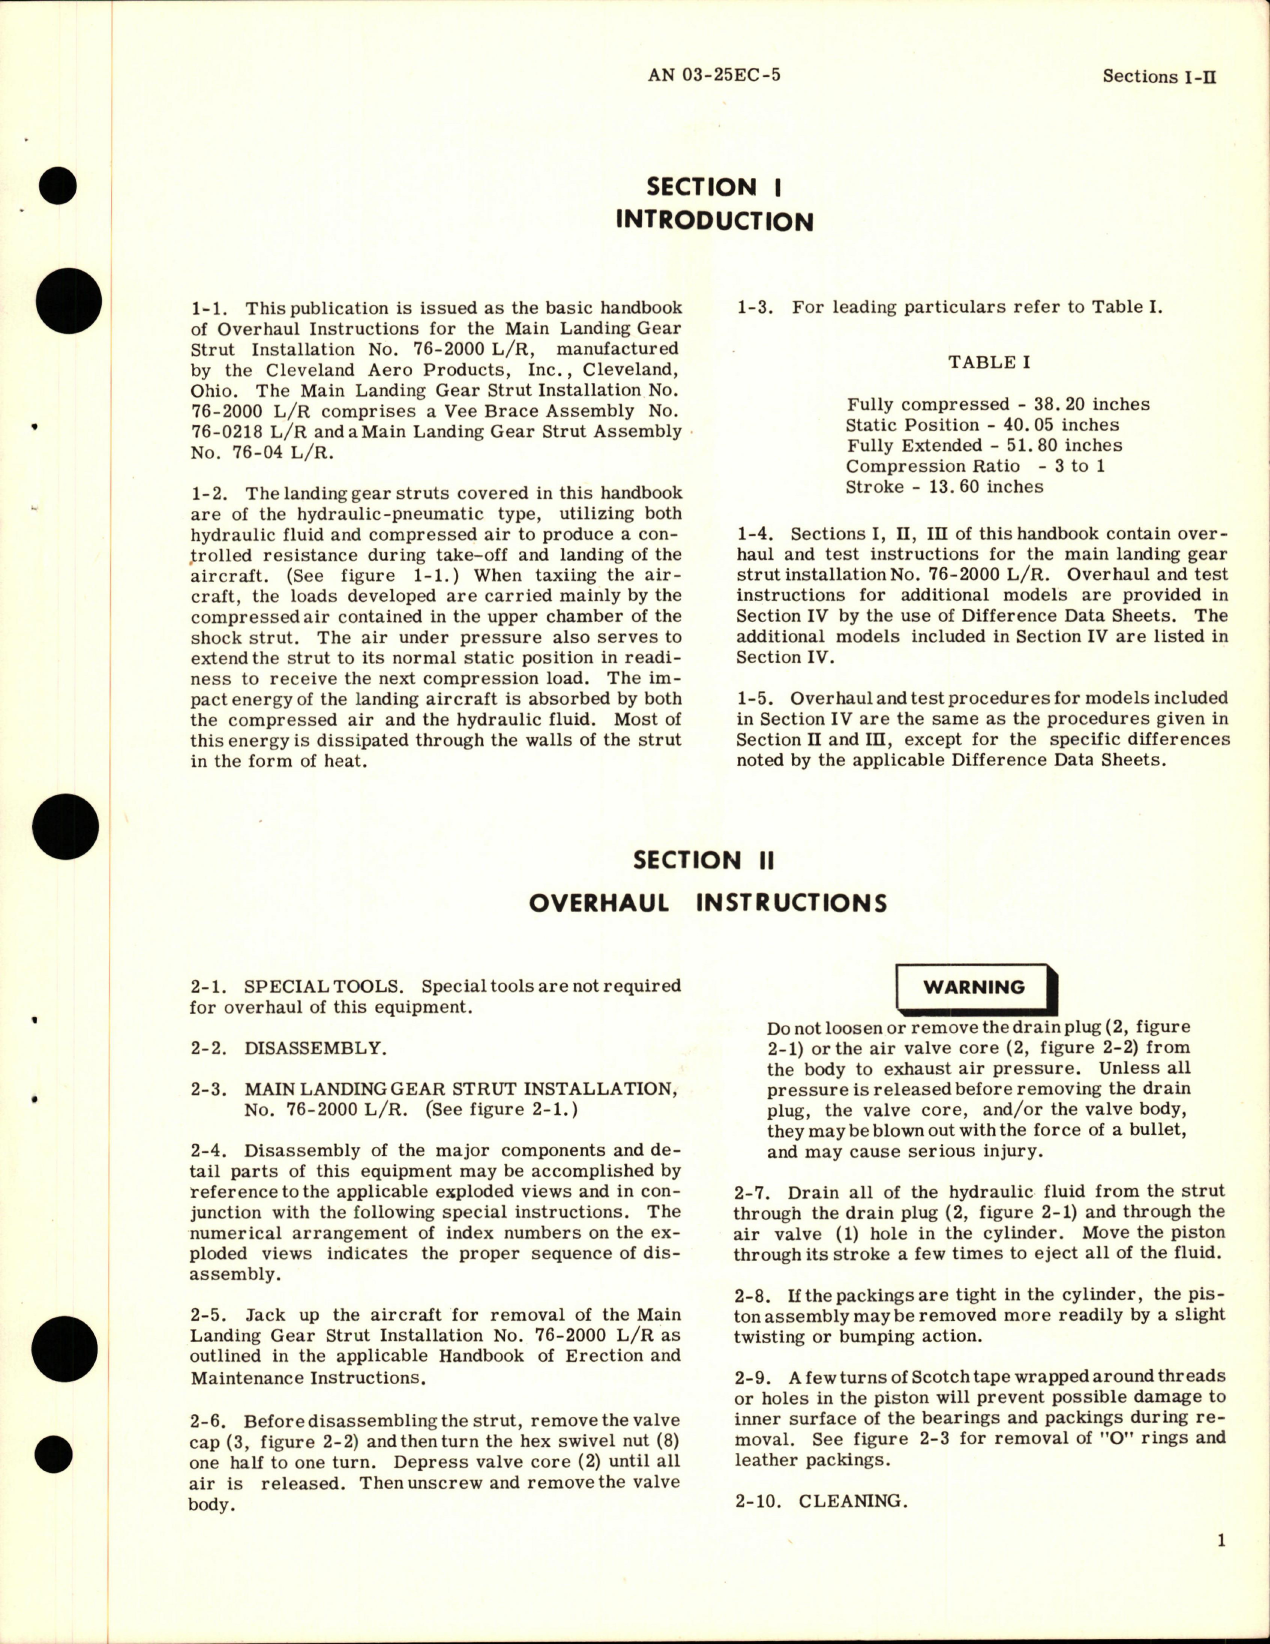 Sample page 5 from AirCorps Library document: Overhaul Instructions for Main Landing Gear Installation and Tail Landing Gear Strut Assembly - 76-200 and 76-03 